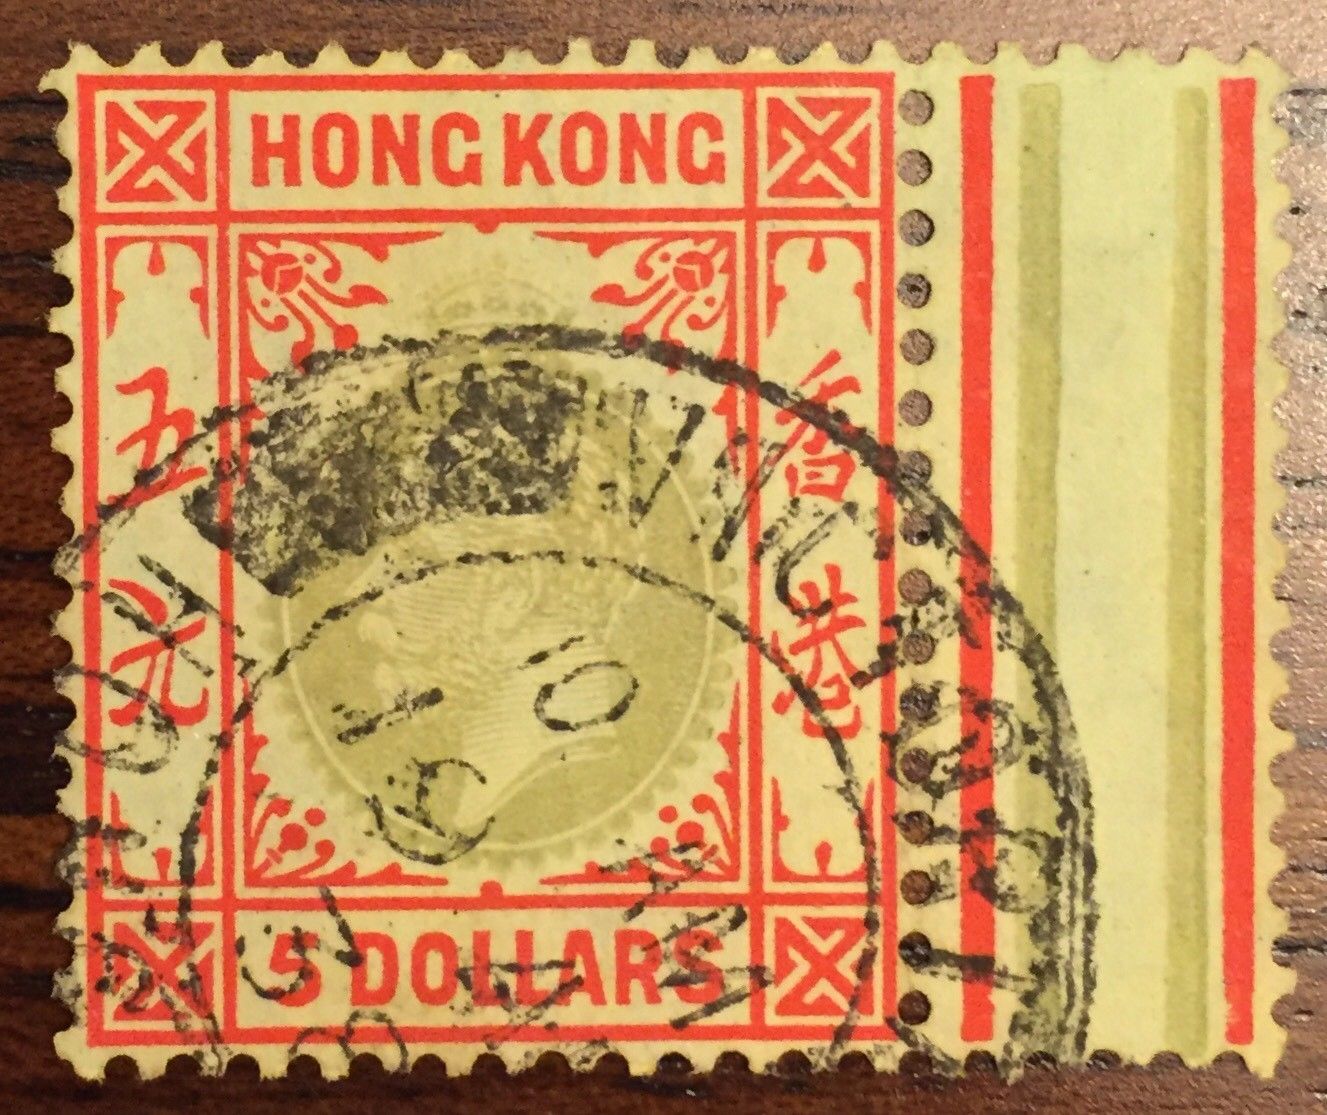 TangStamps Hong Kong Stamp Scott #146, King George $5 With Swing